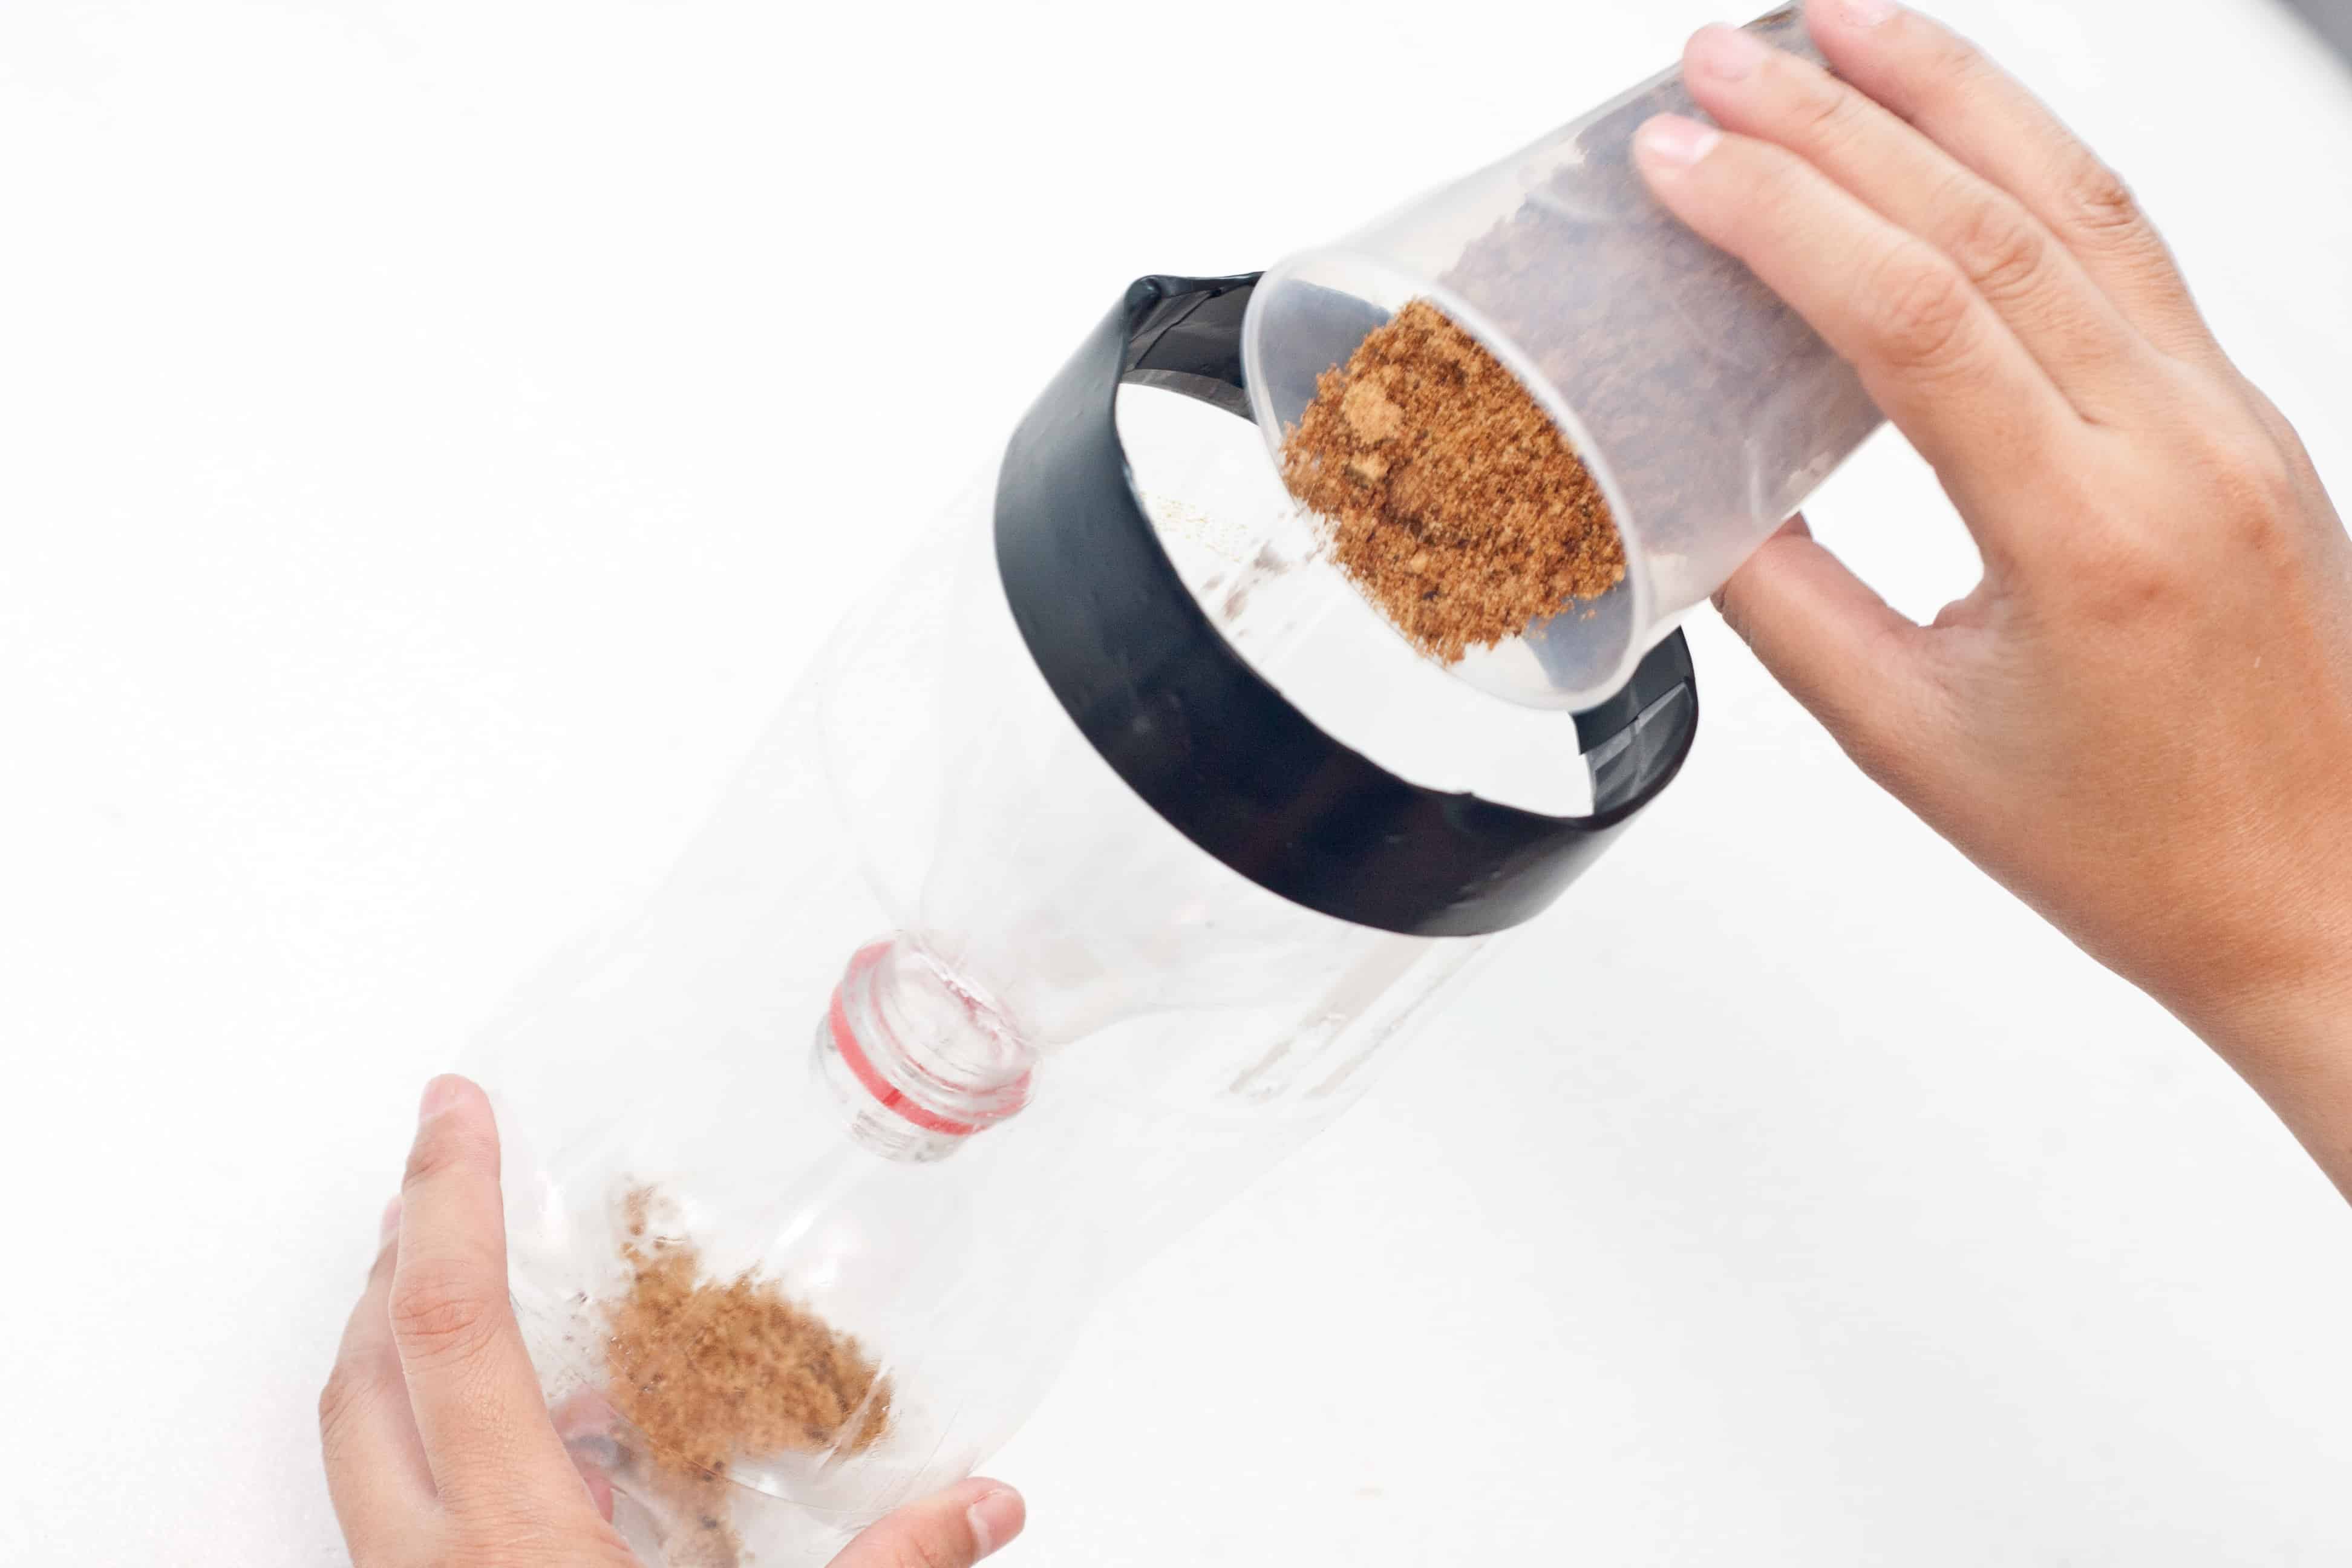 pouring brown sugar into a homemade fly trap